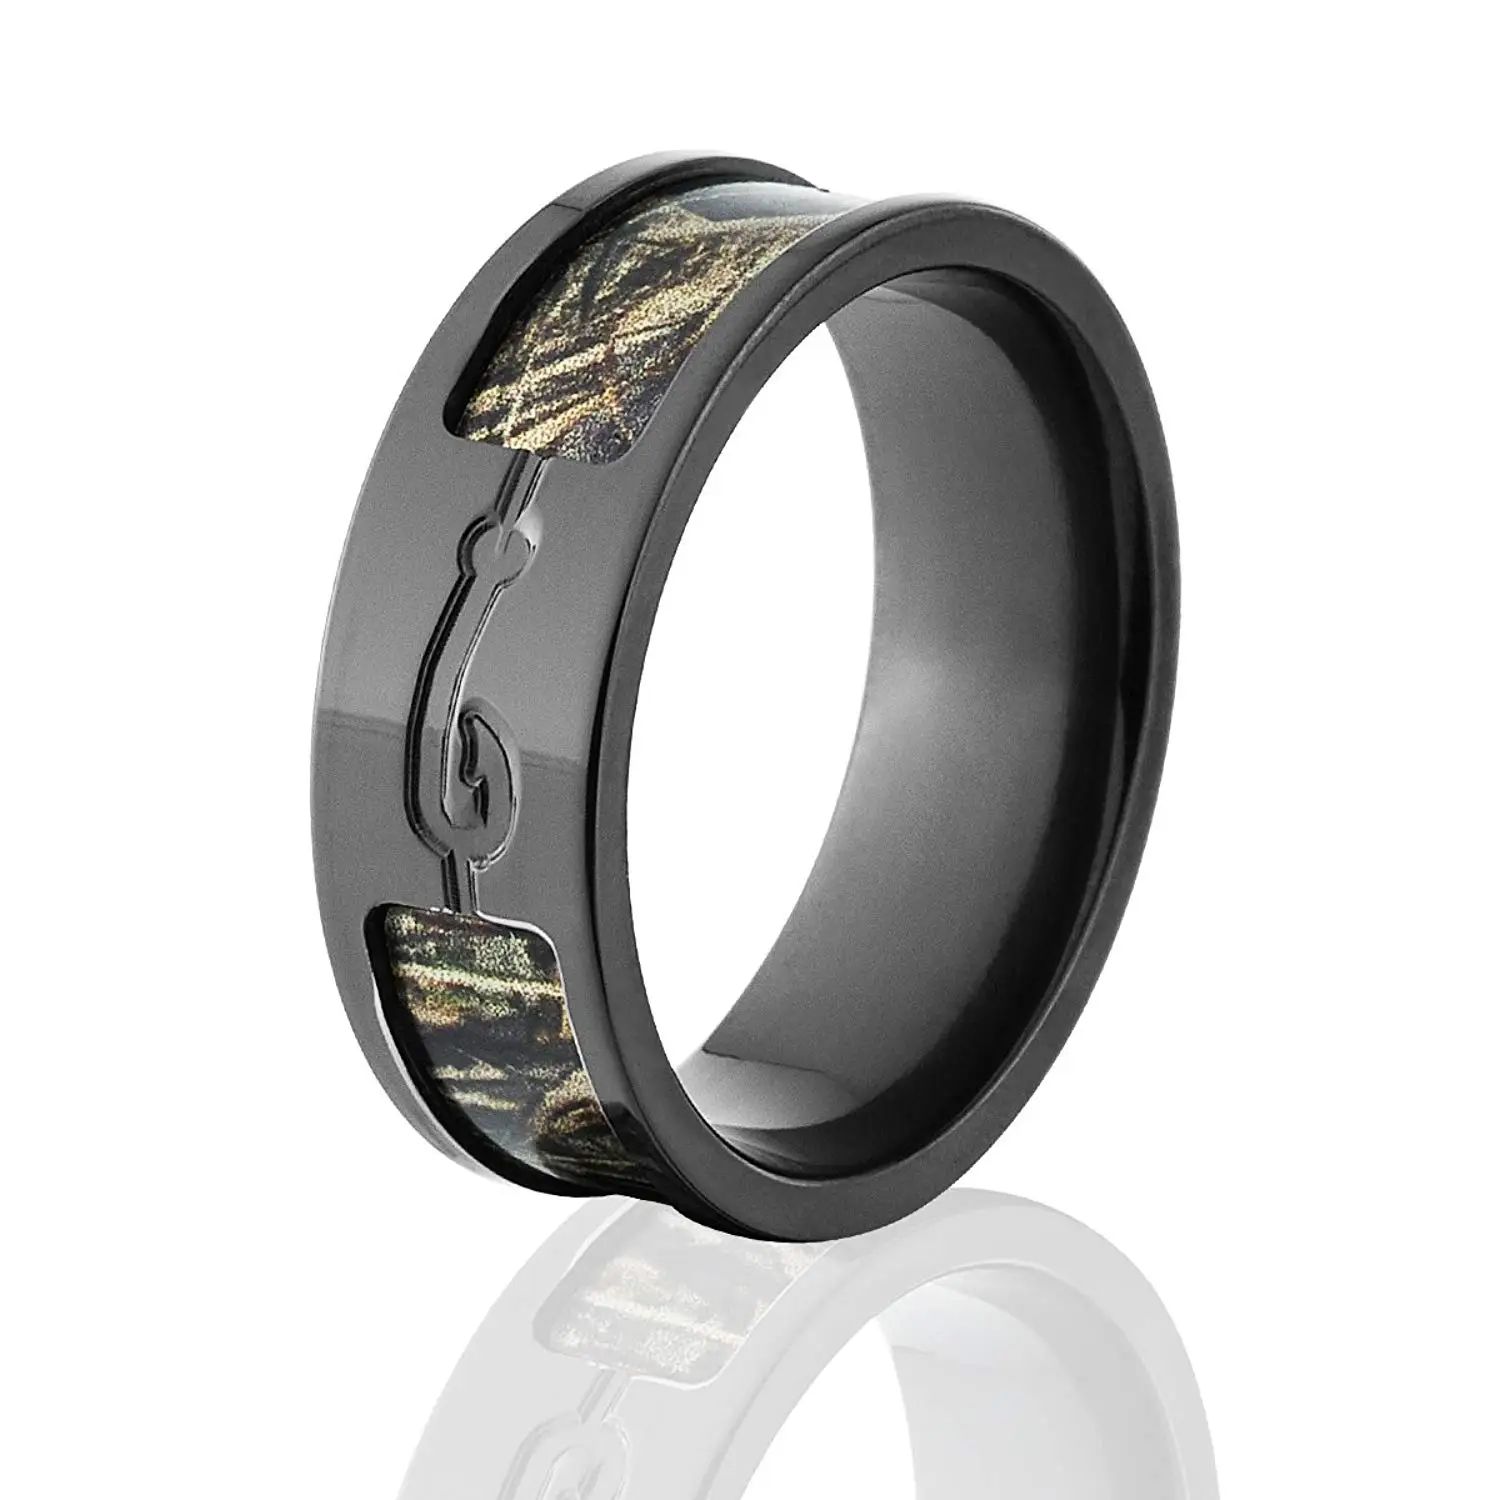 Cheap Camo Rings Cheap Find Camo Rings Cheap Deals On Line At